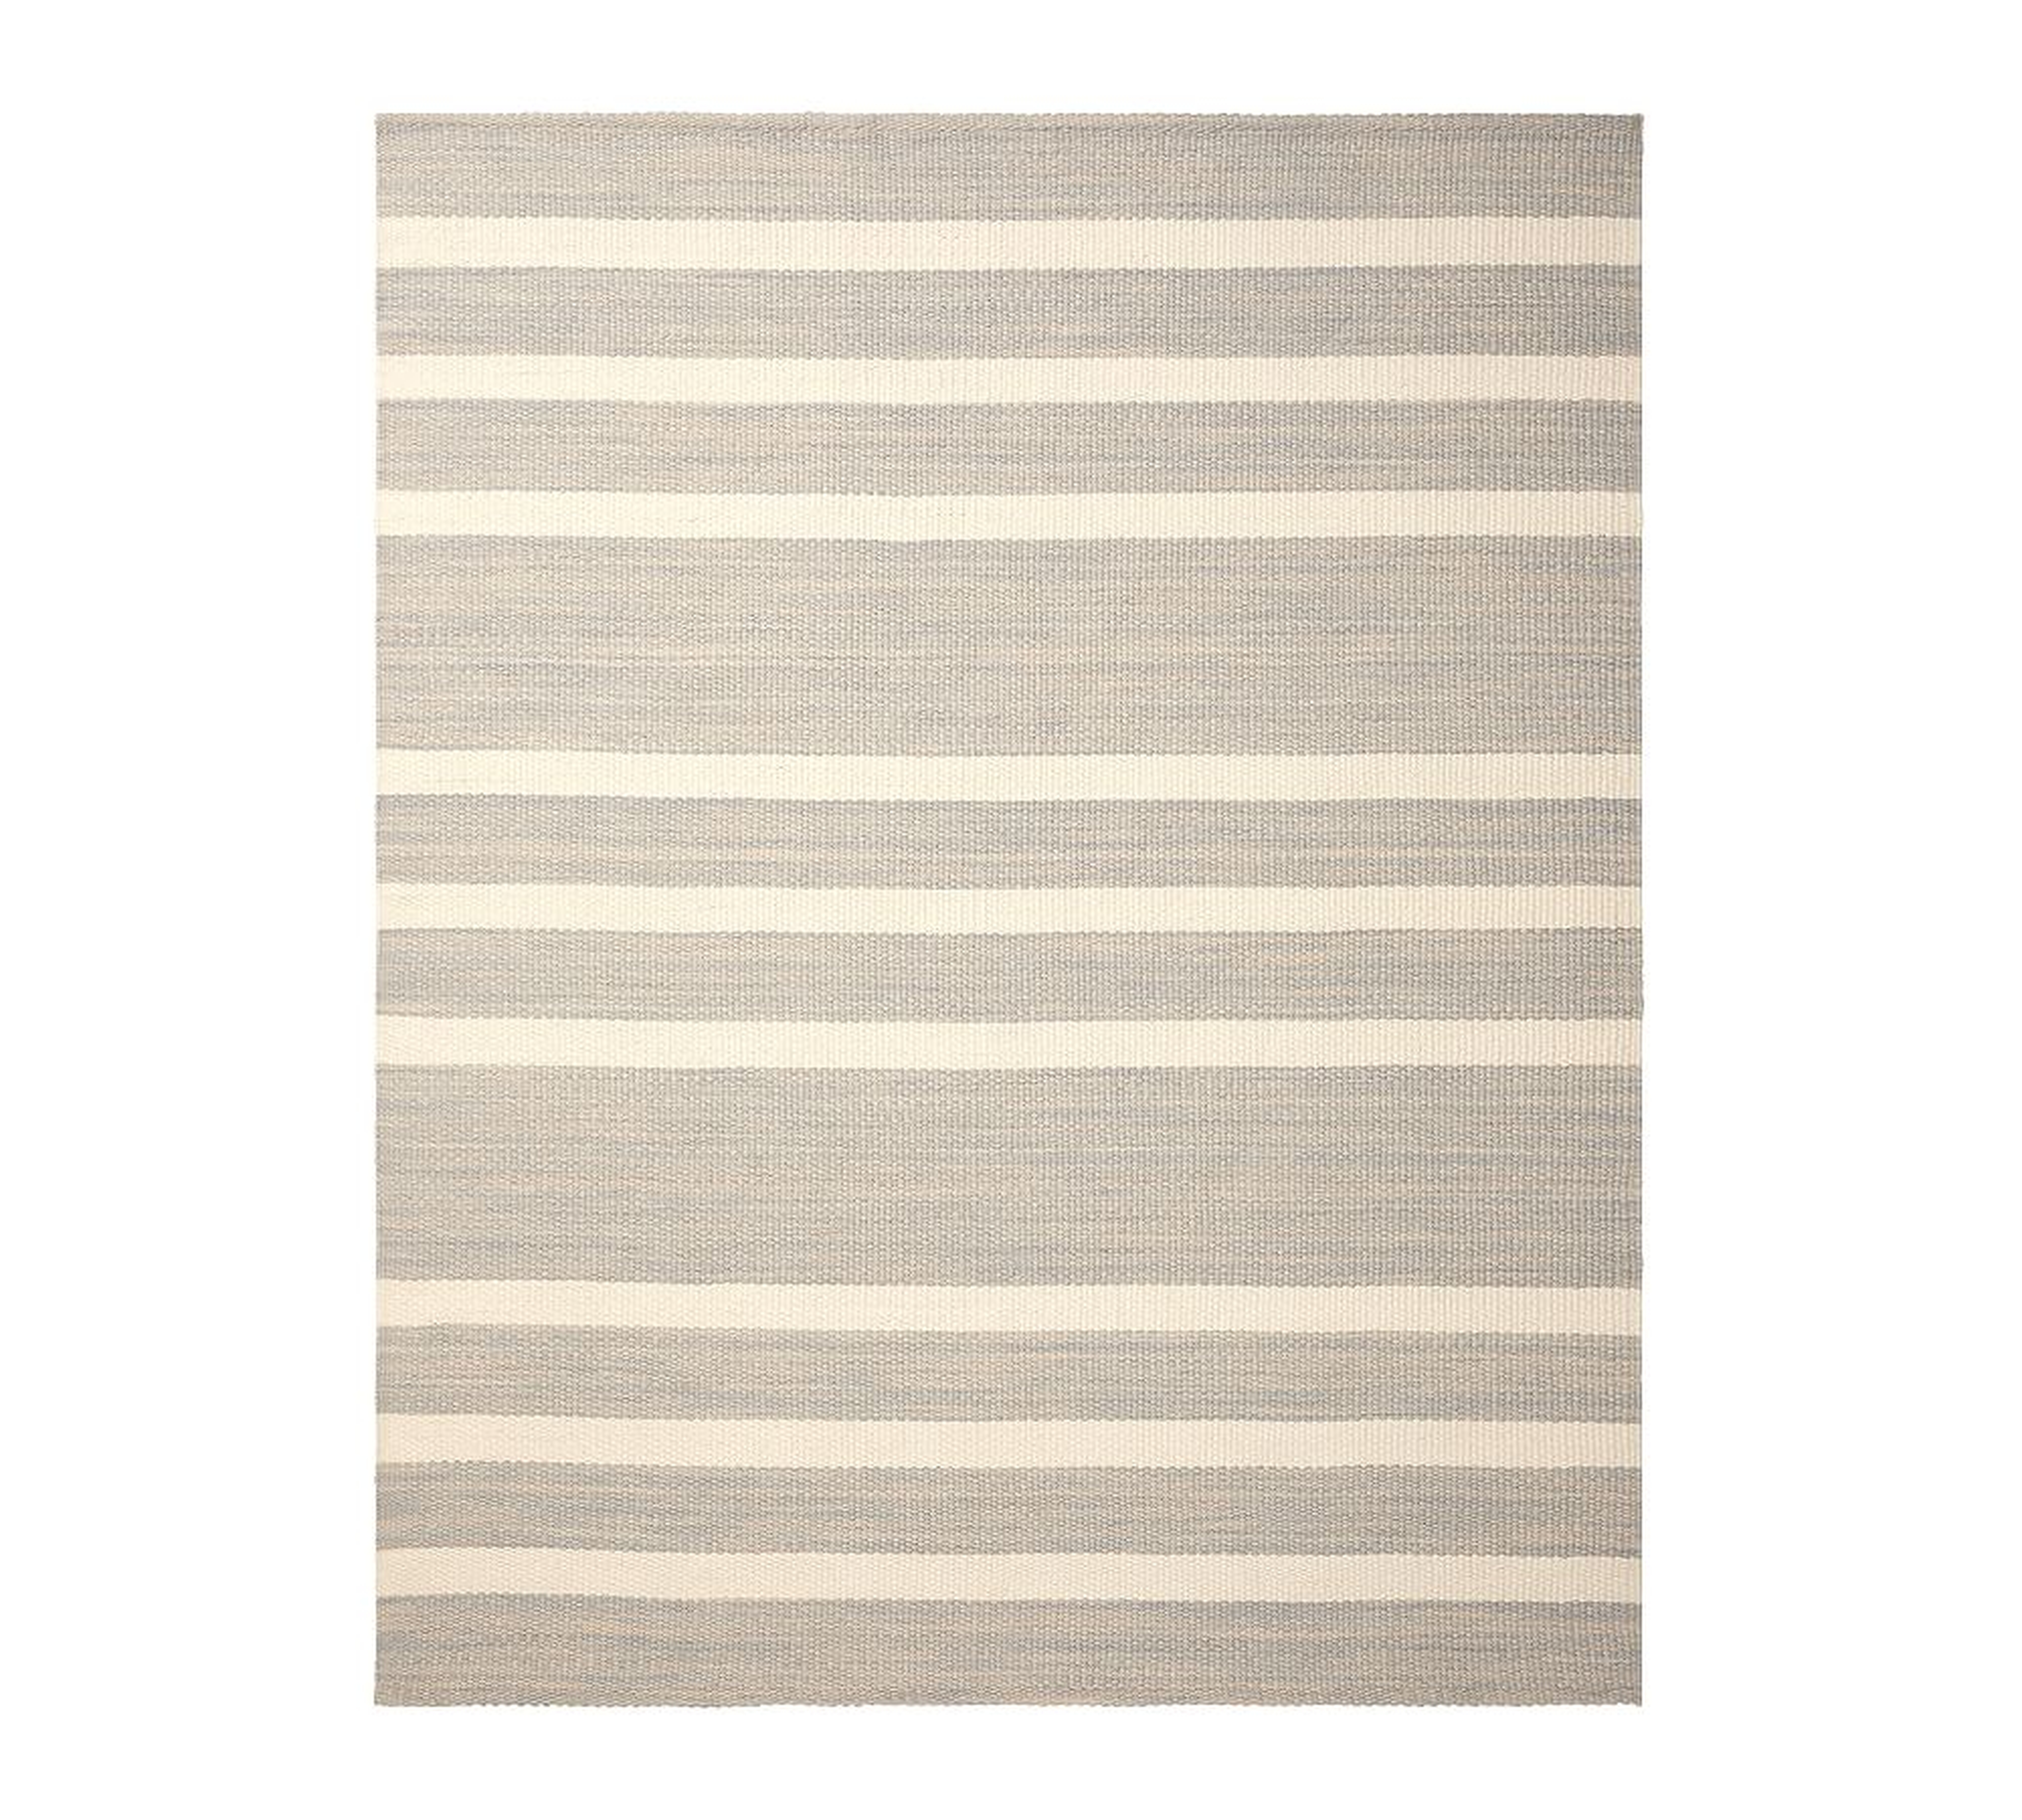 Danton Striped Performance Indoor/Outdoor Rug, 8' x 10', Dove Gray/Parchment - Pottery Barn